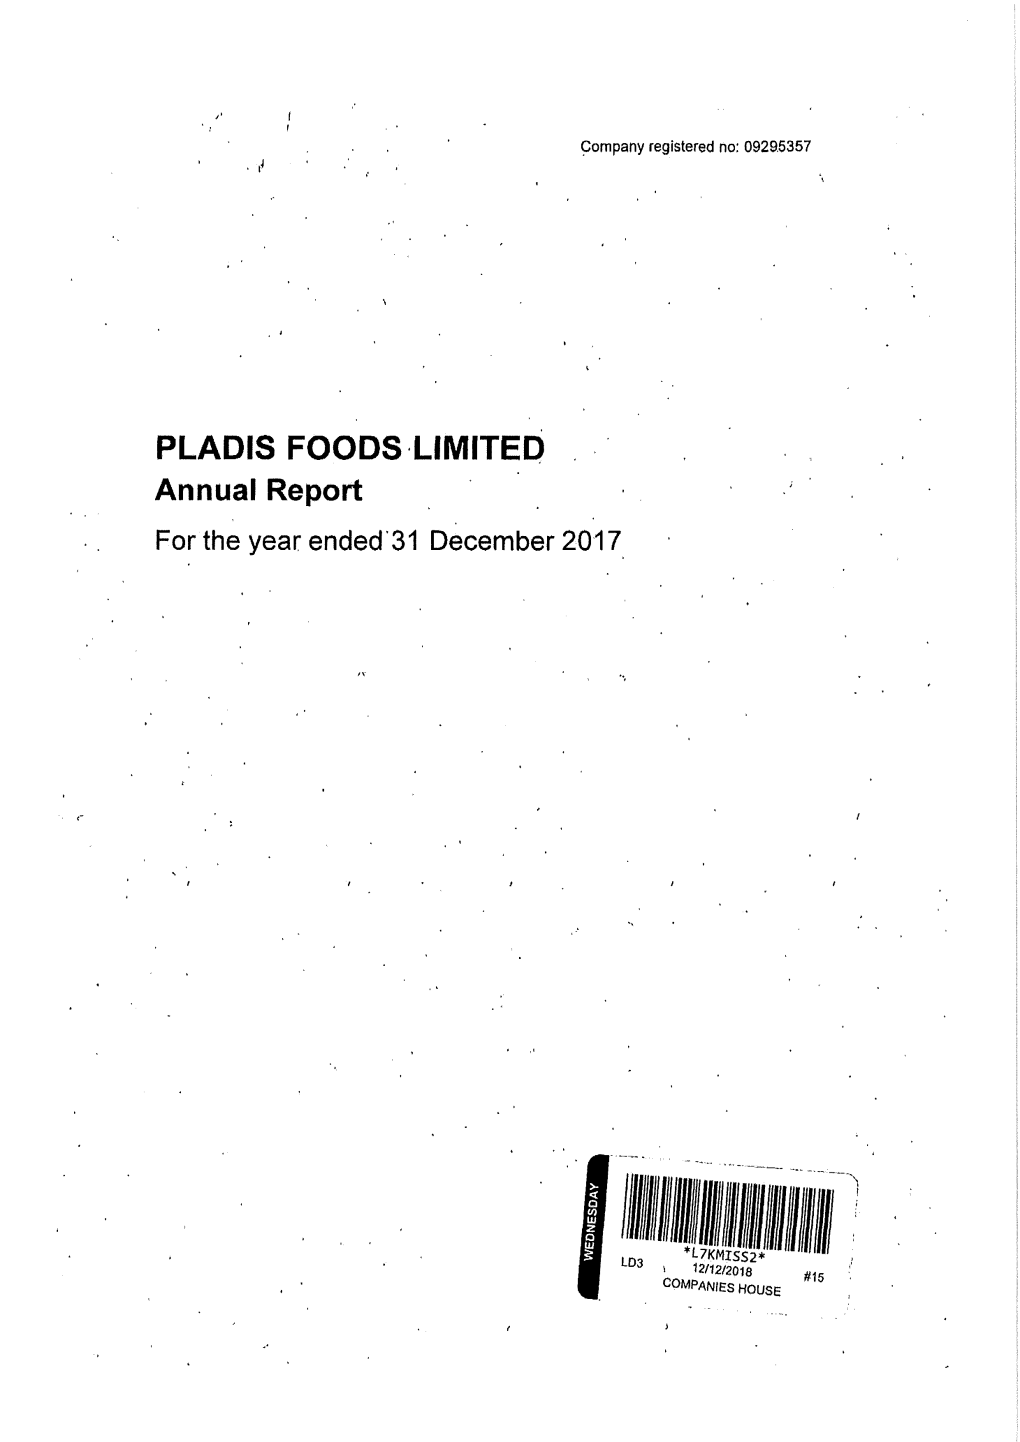 PLADI~ FUODS~LIMITED Annual Report for the Year Ended'31 December 20~ 7